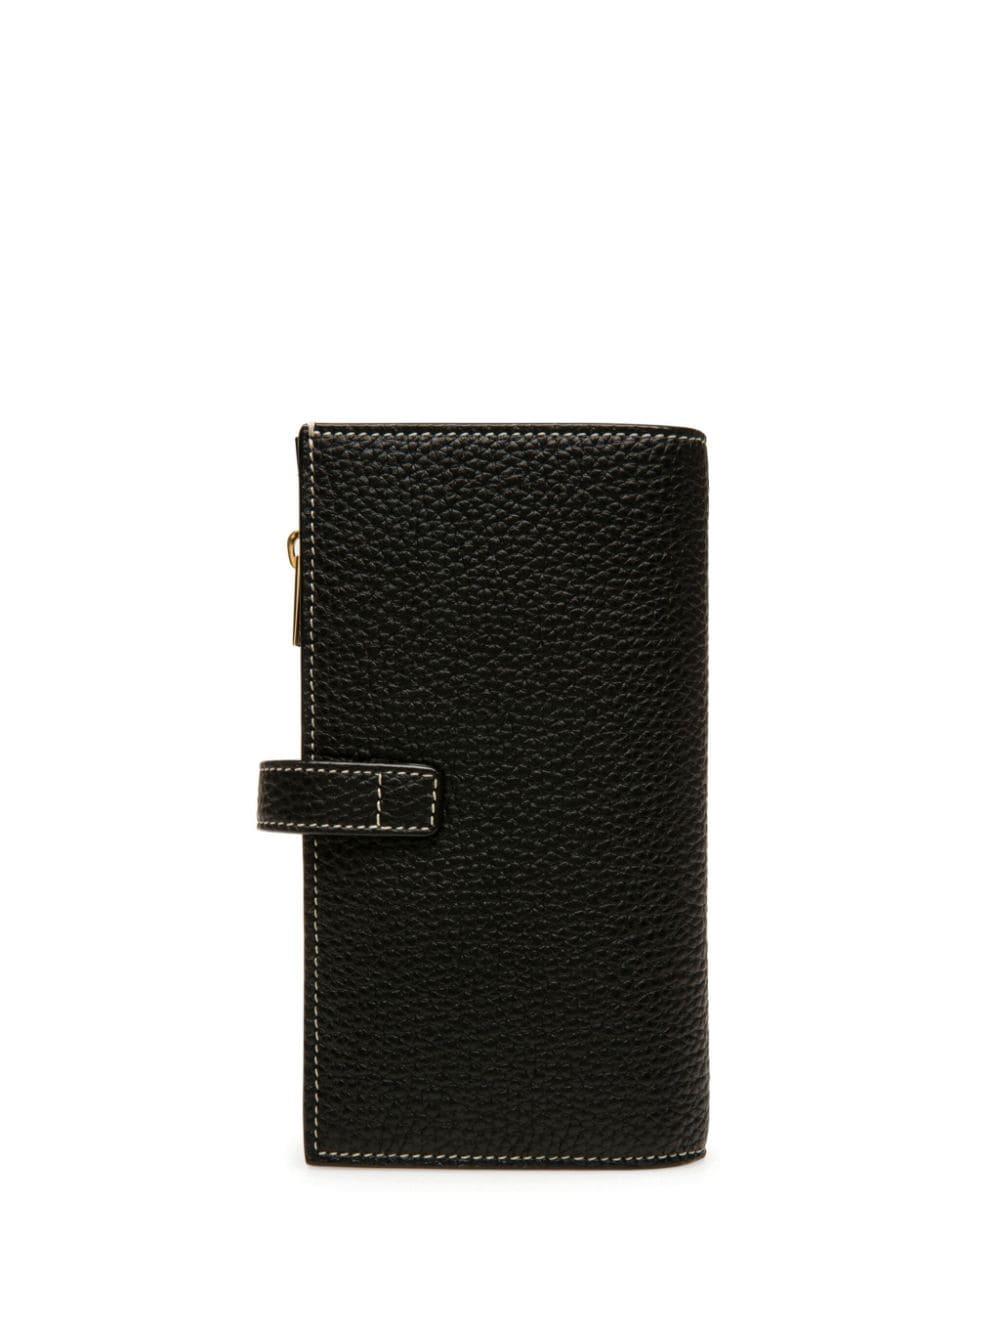 Bally small Amber leather wallet - Black